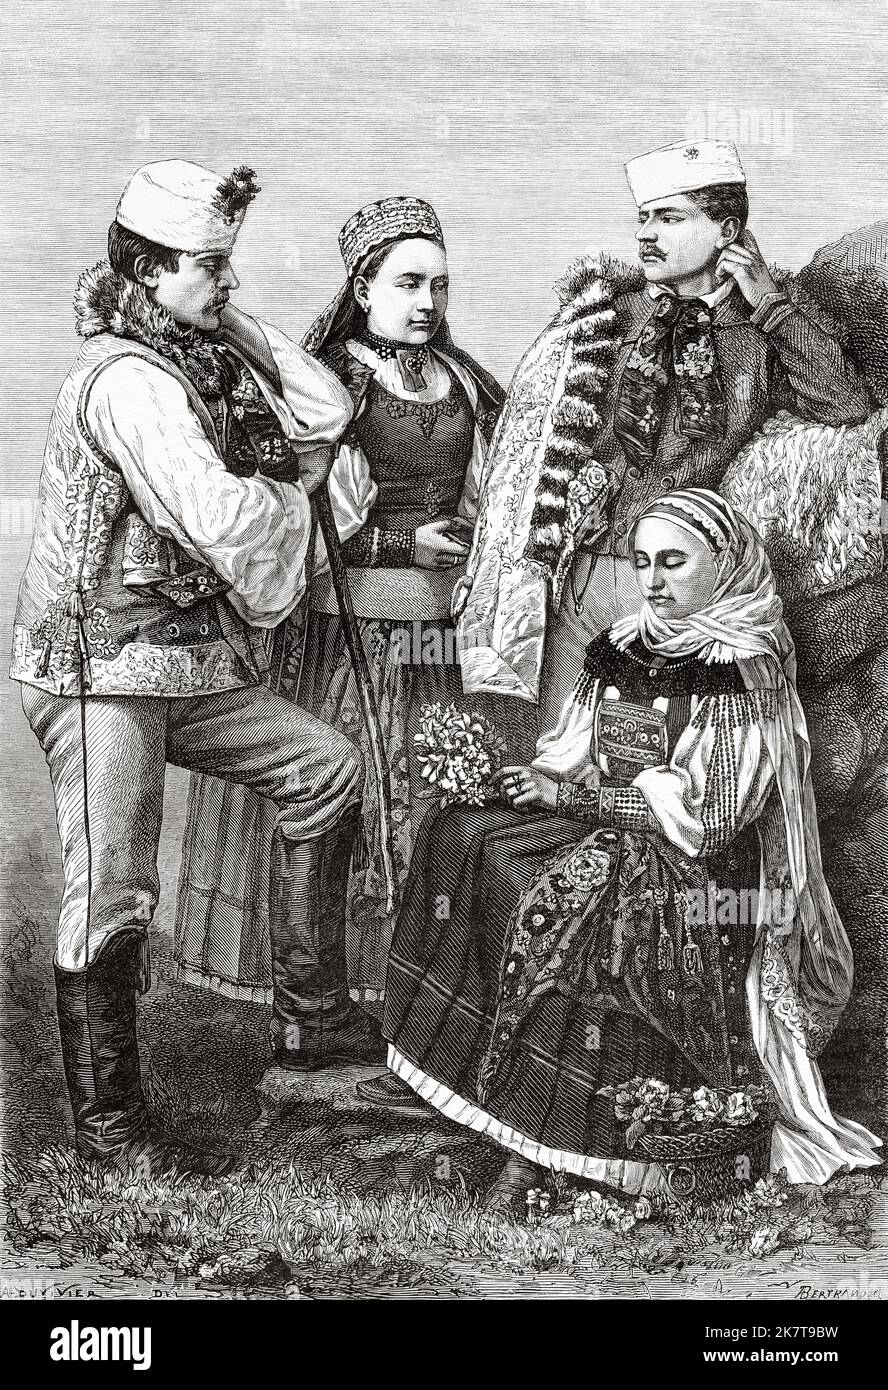 Magyars of Torotzko, Romania. Europe. Travel to the mining regions of western Transylvania by Jacques Elisee Reclus, 1873 Stock Photo